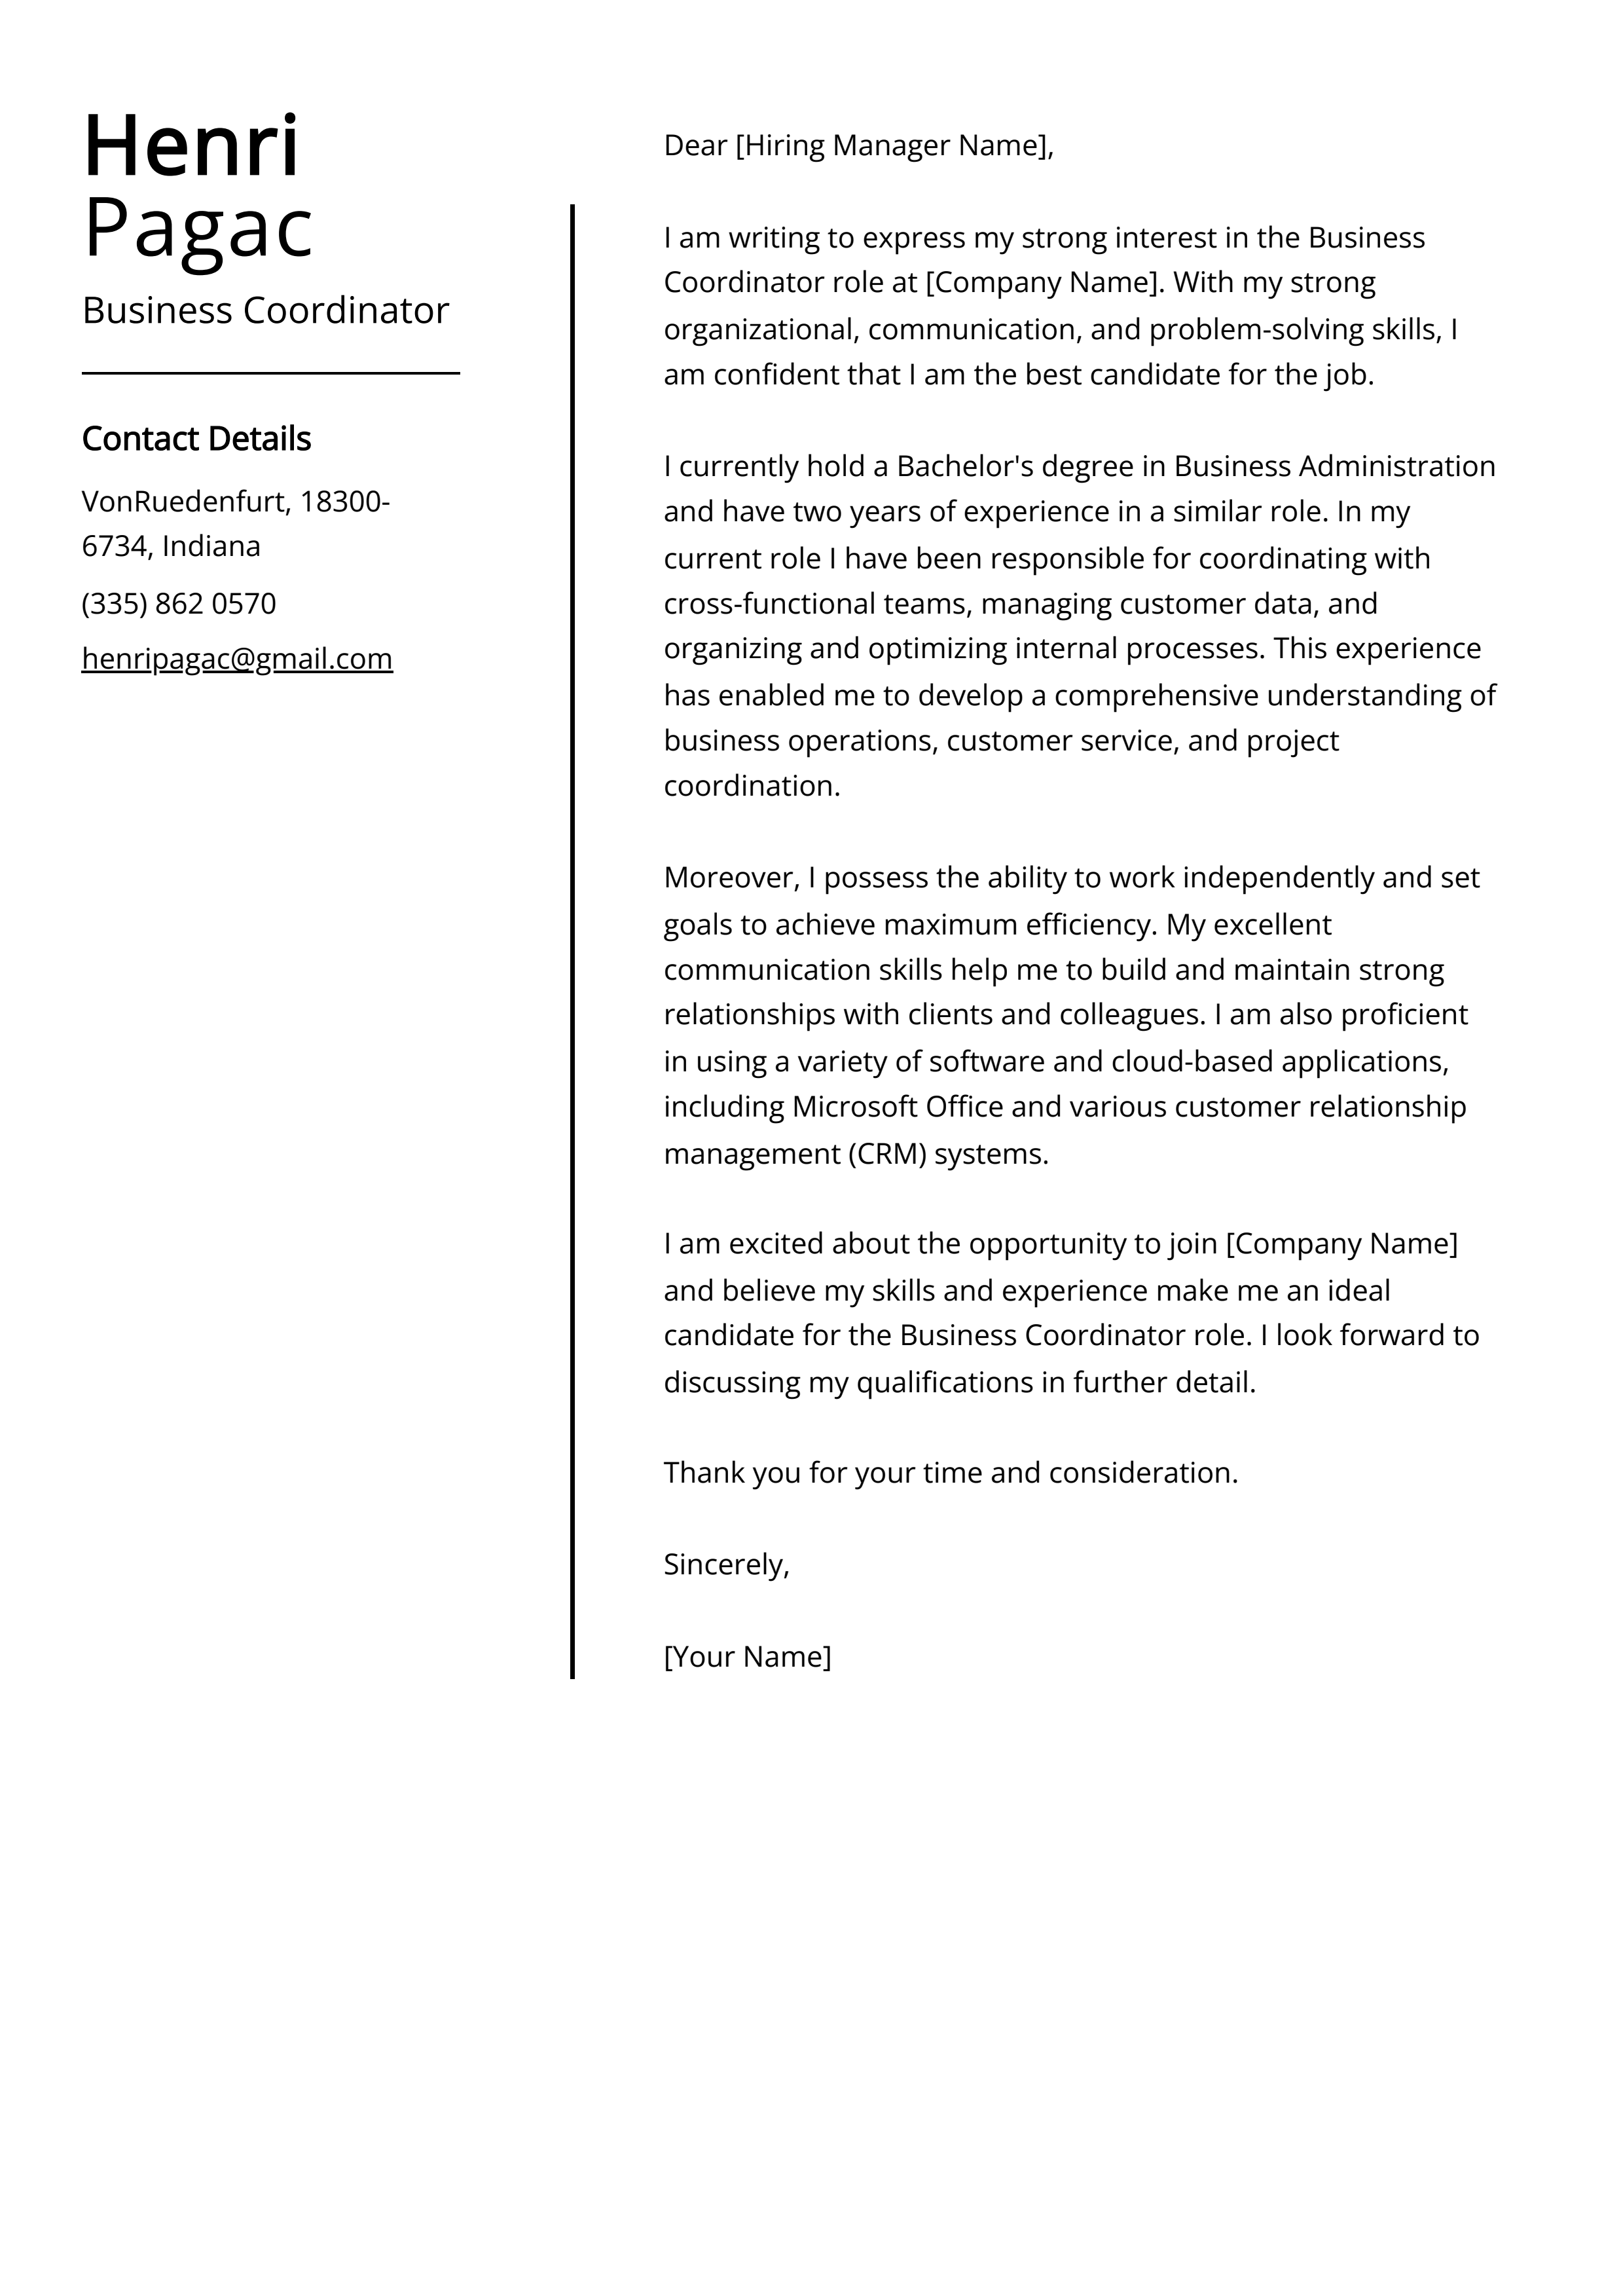 Business Coordinator Cover Letter Example